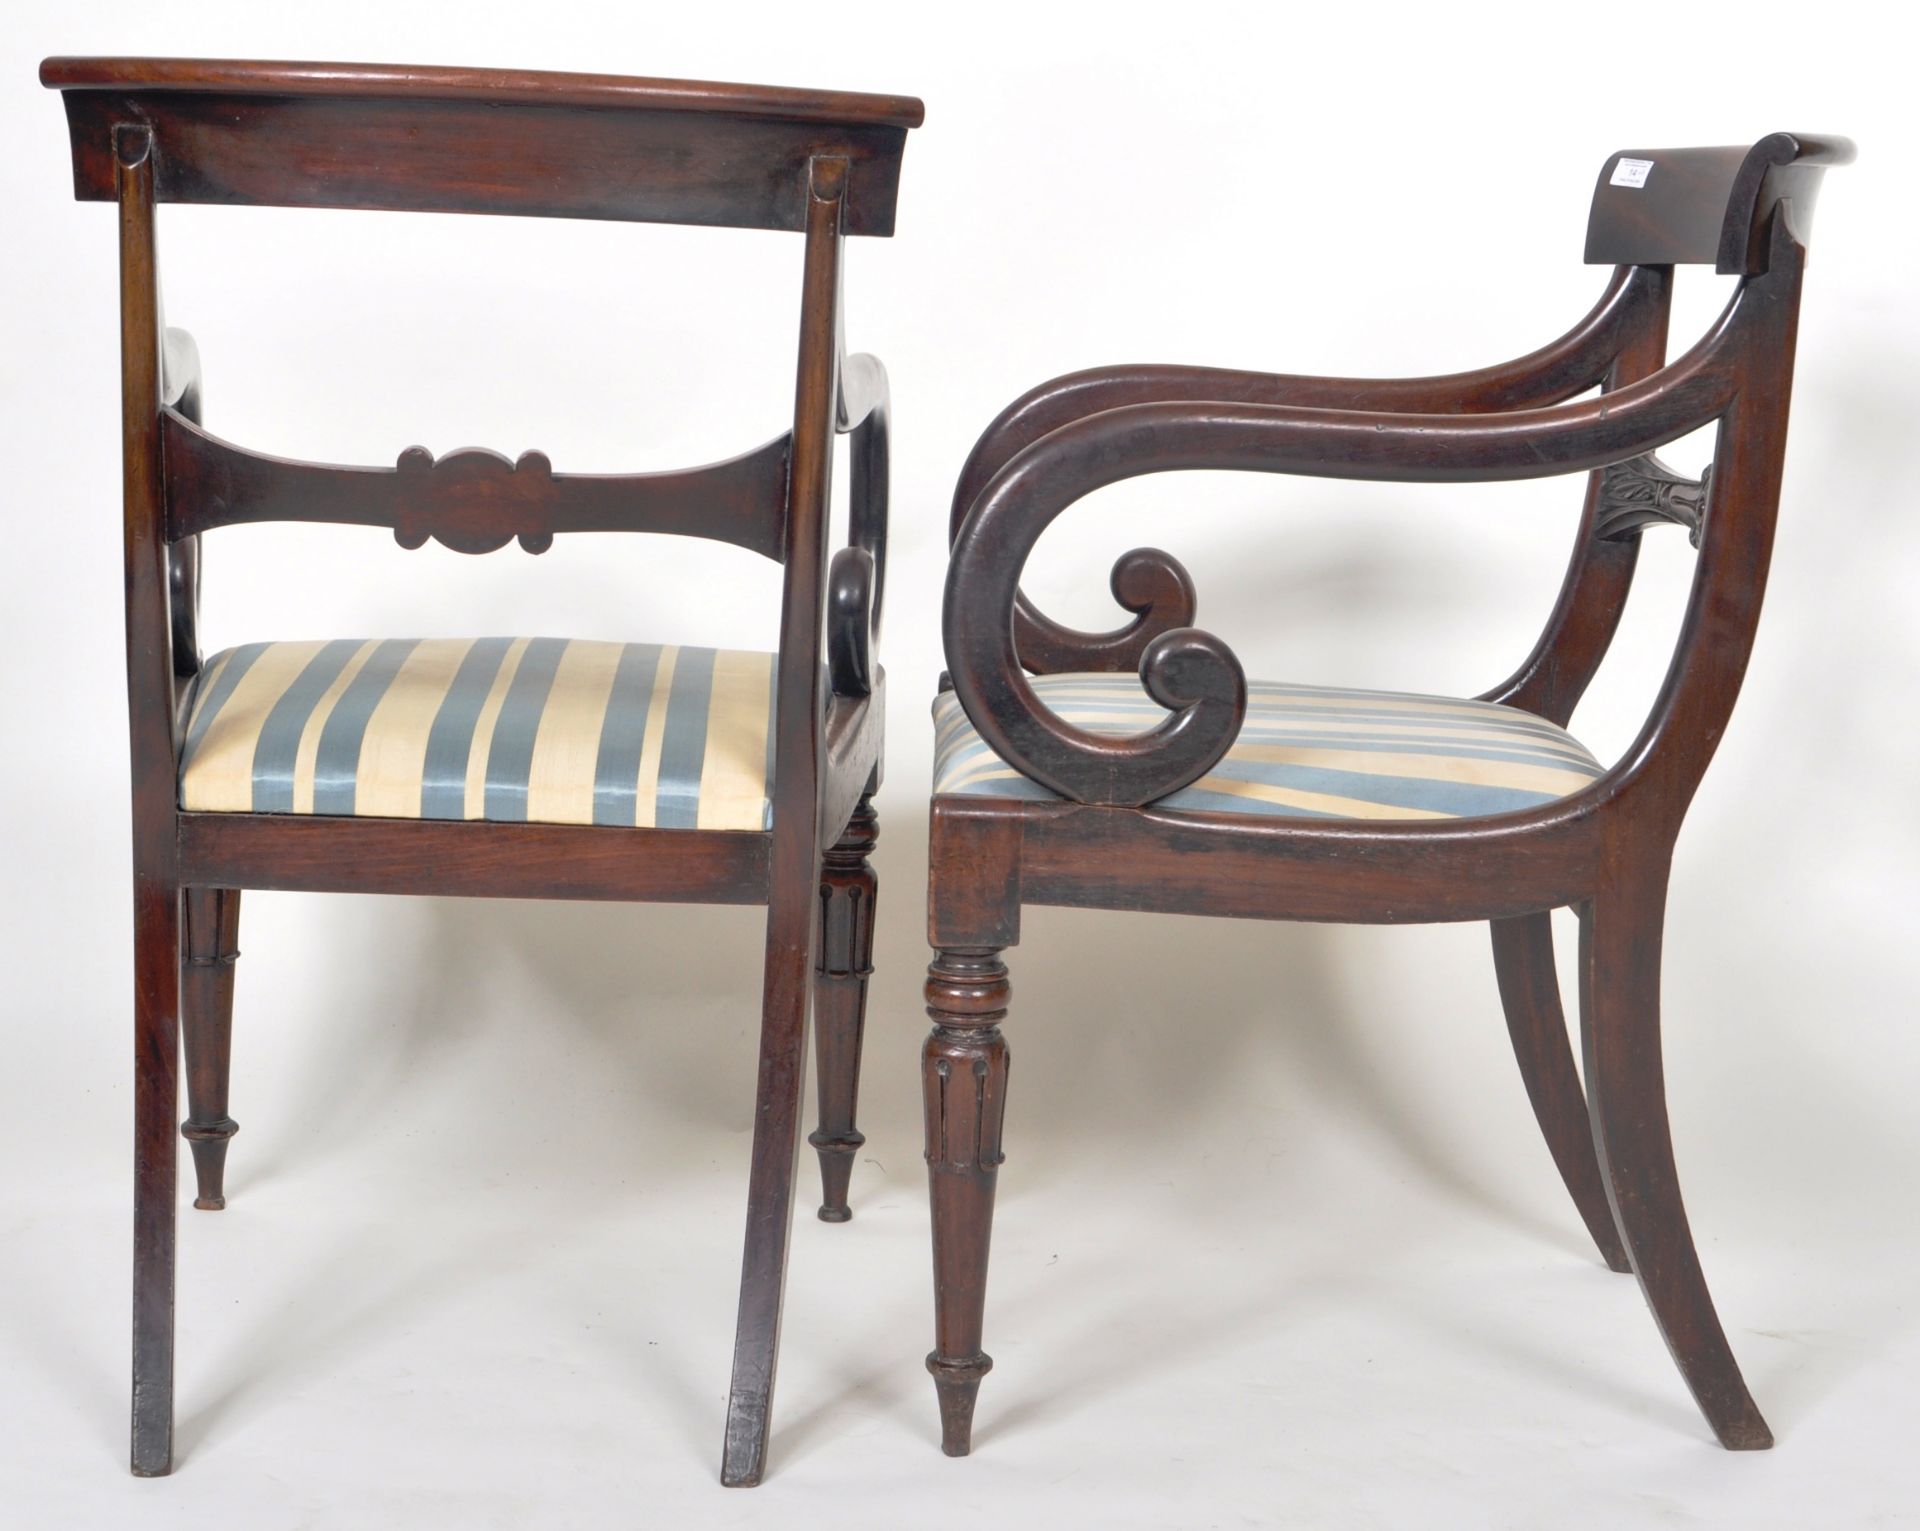 PAIR OF REGENCY MAHOGANY GILLOW MANNER ARMCHAIRS - Image 7 of 8